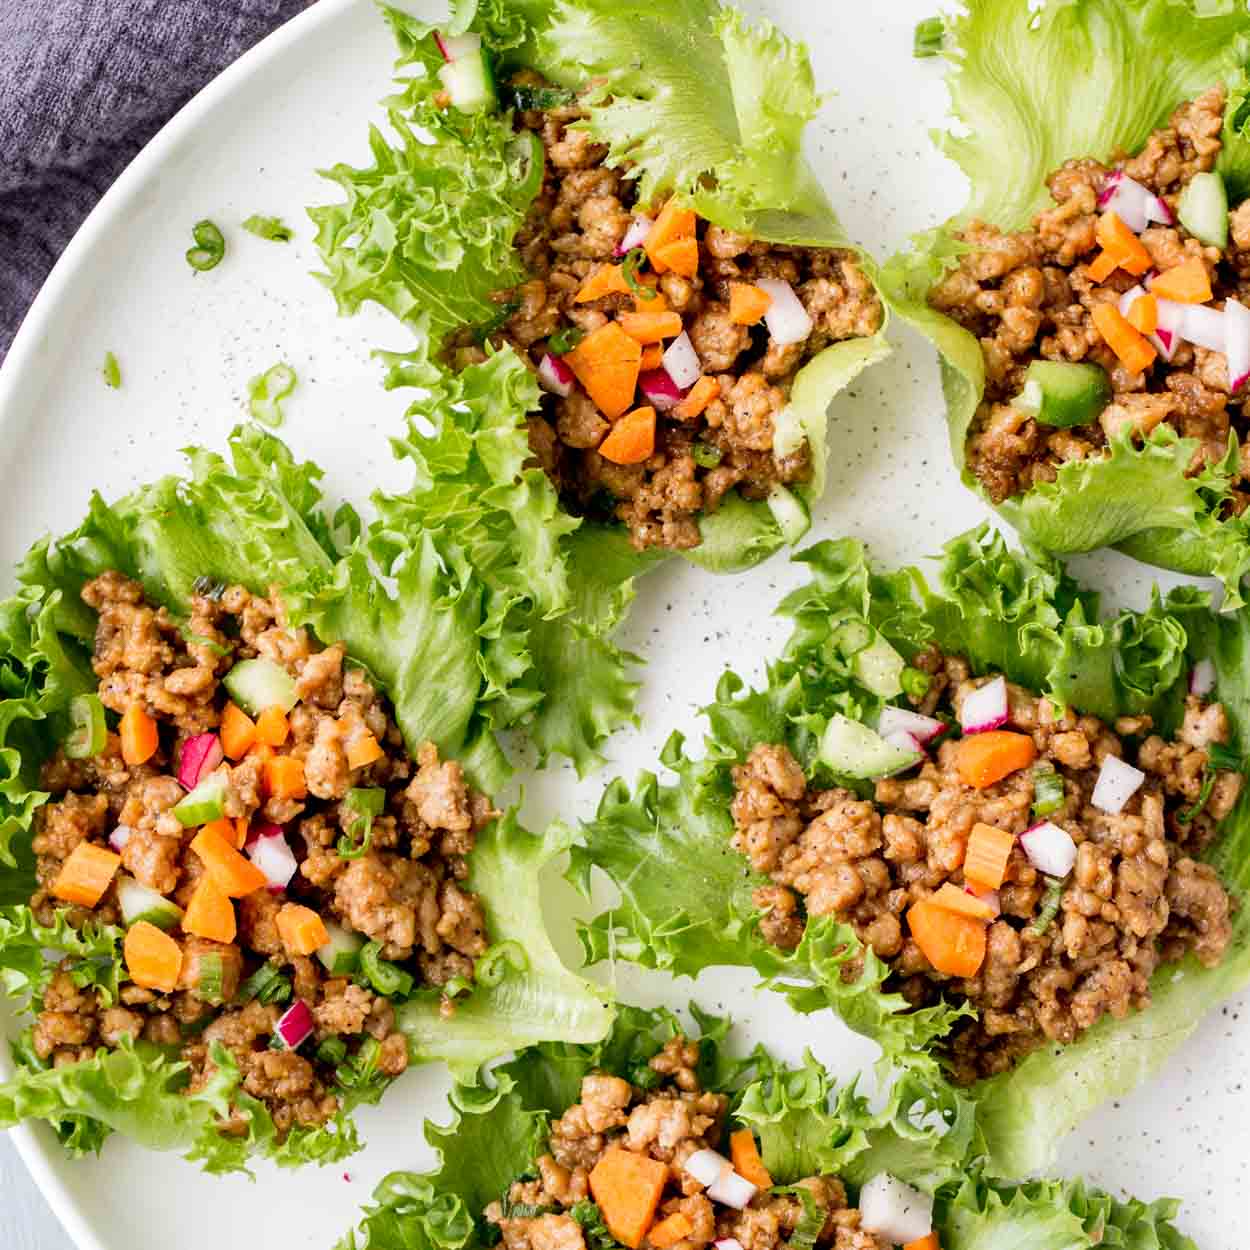 A plate of lettuce wraps, full of chicken, and garnished with toppings.